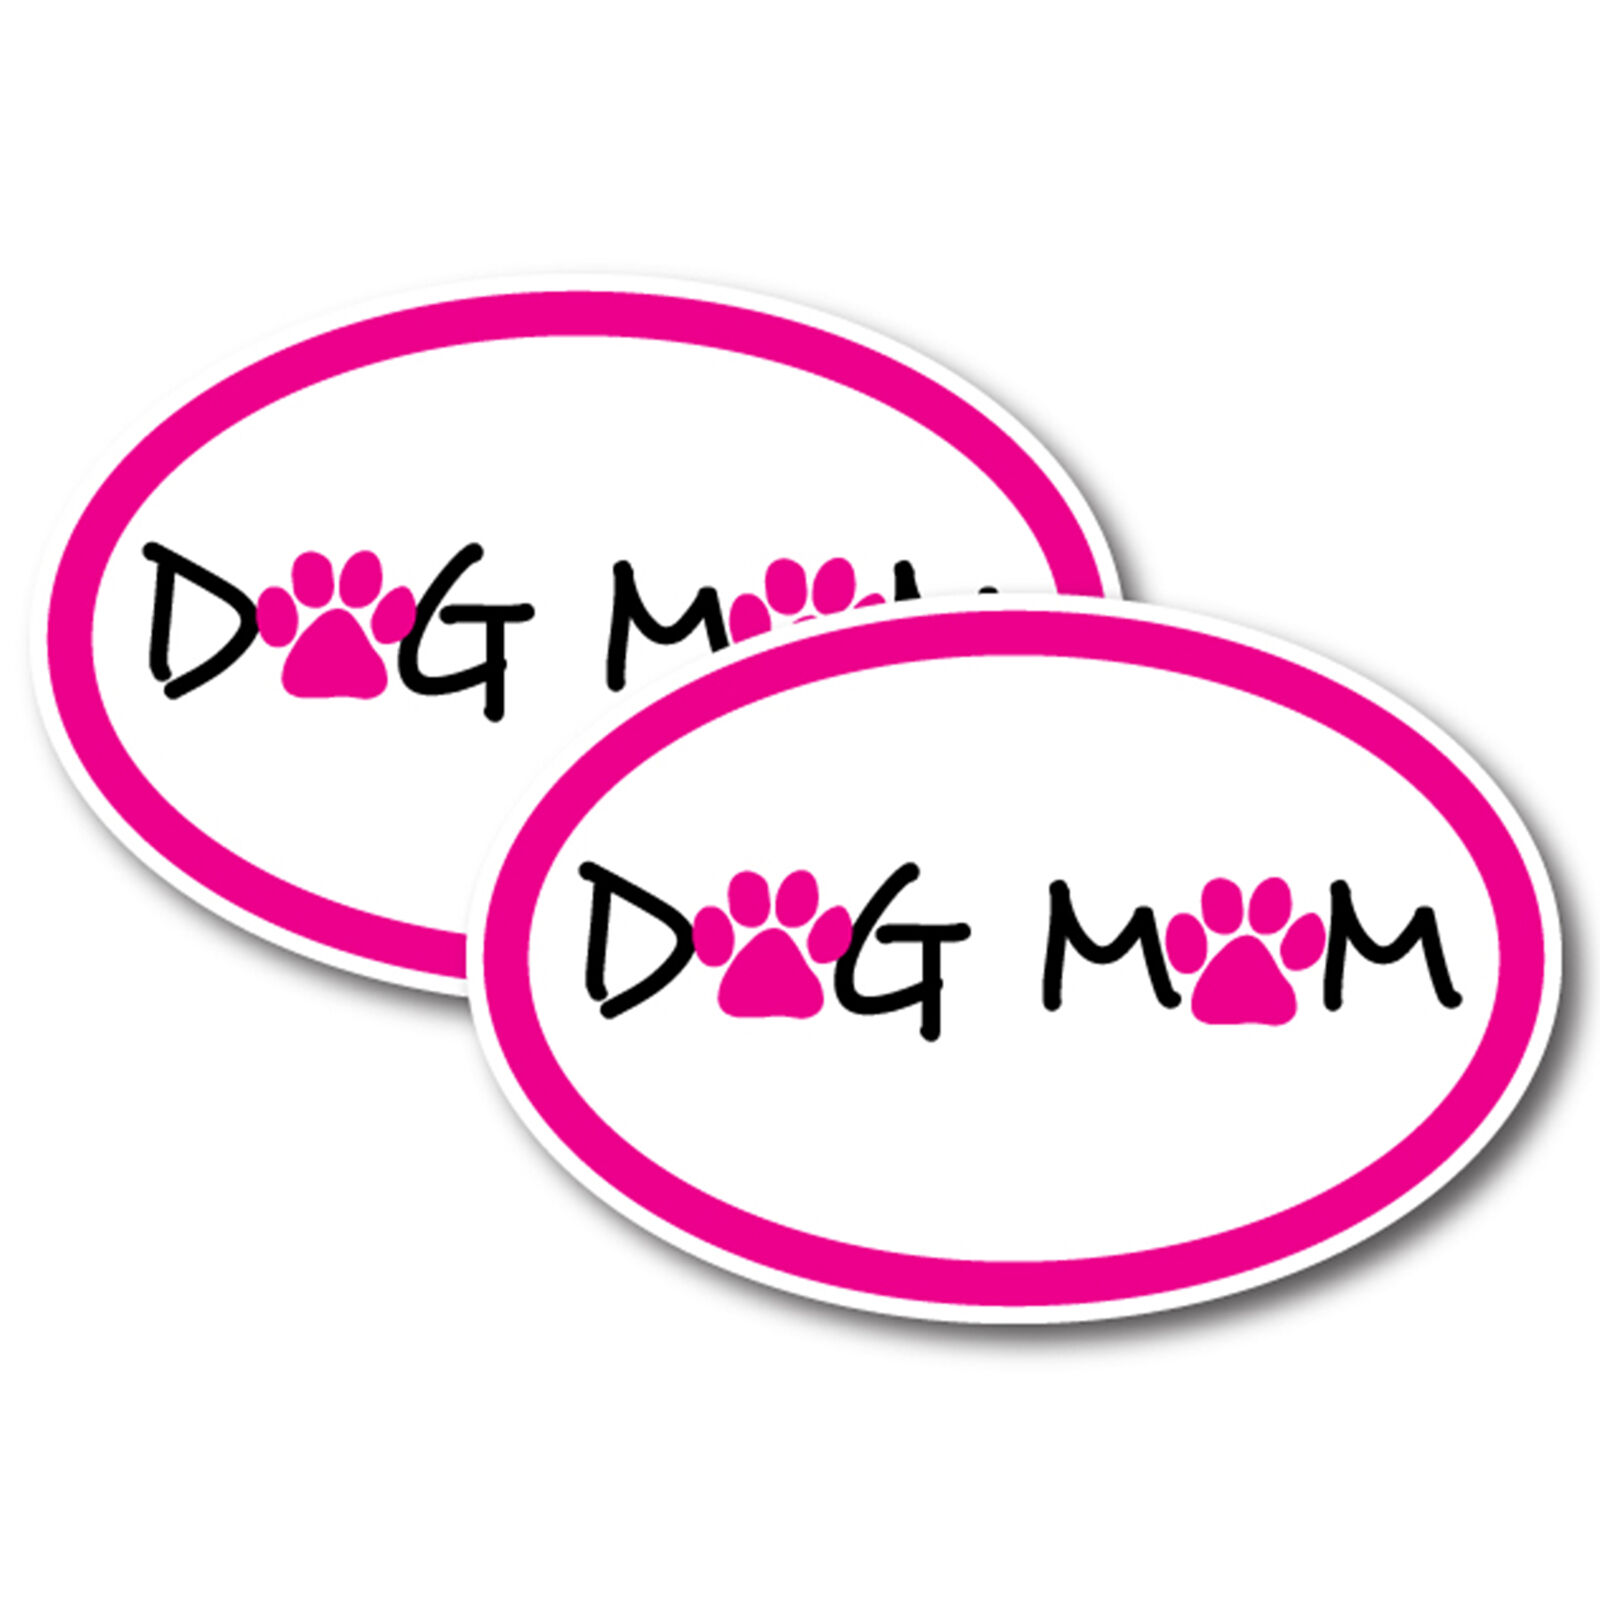 Dog Mom Pink Oval Magnet Decal, 4x6 Inches, Automotive Magnet 2 Pack